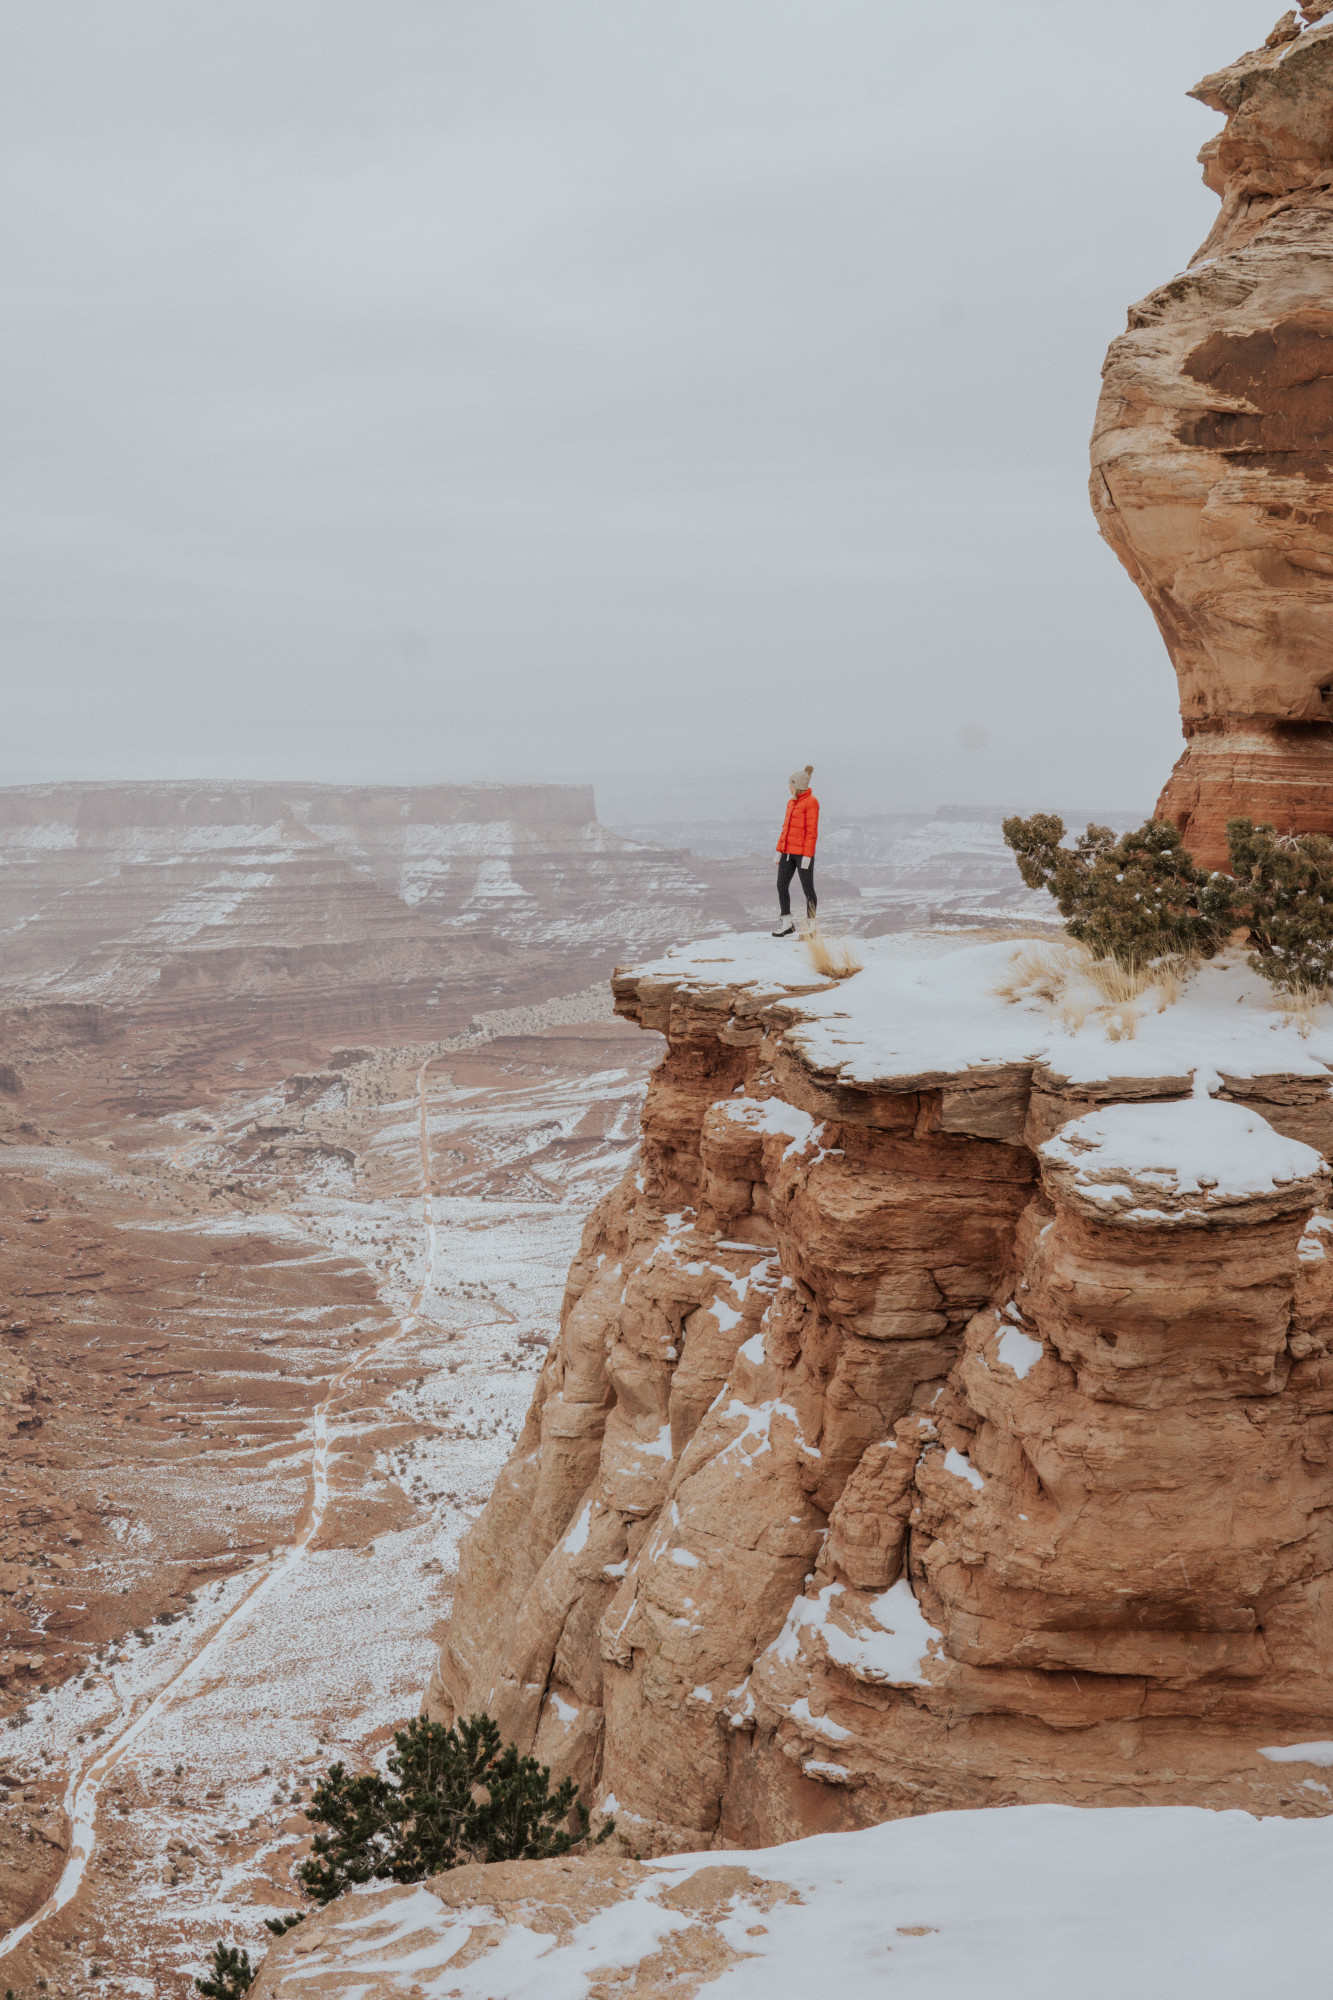 Canyonlands in the Winter